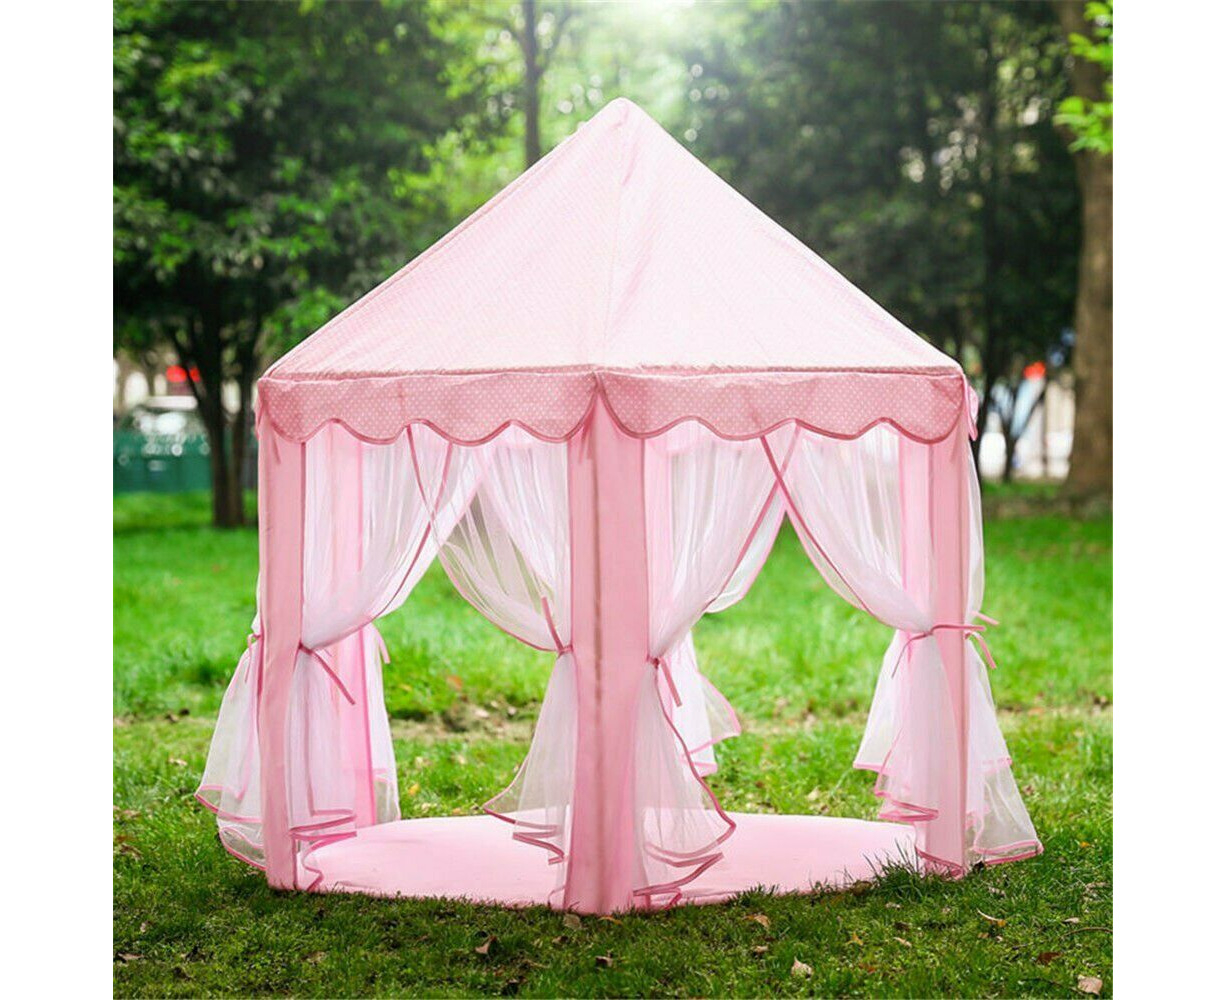 DxH Porpora Kids Indoor/Outdoor Princess Castle Play Tent Fairy Princess Portable Fun Perfect Hexagon Large Playhouse Toys for Girls,Boys,Children Toddlers Gift/Present Extra Large Room 55x 53 BLUE 